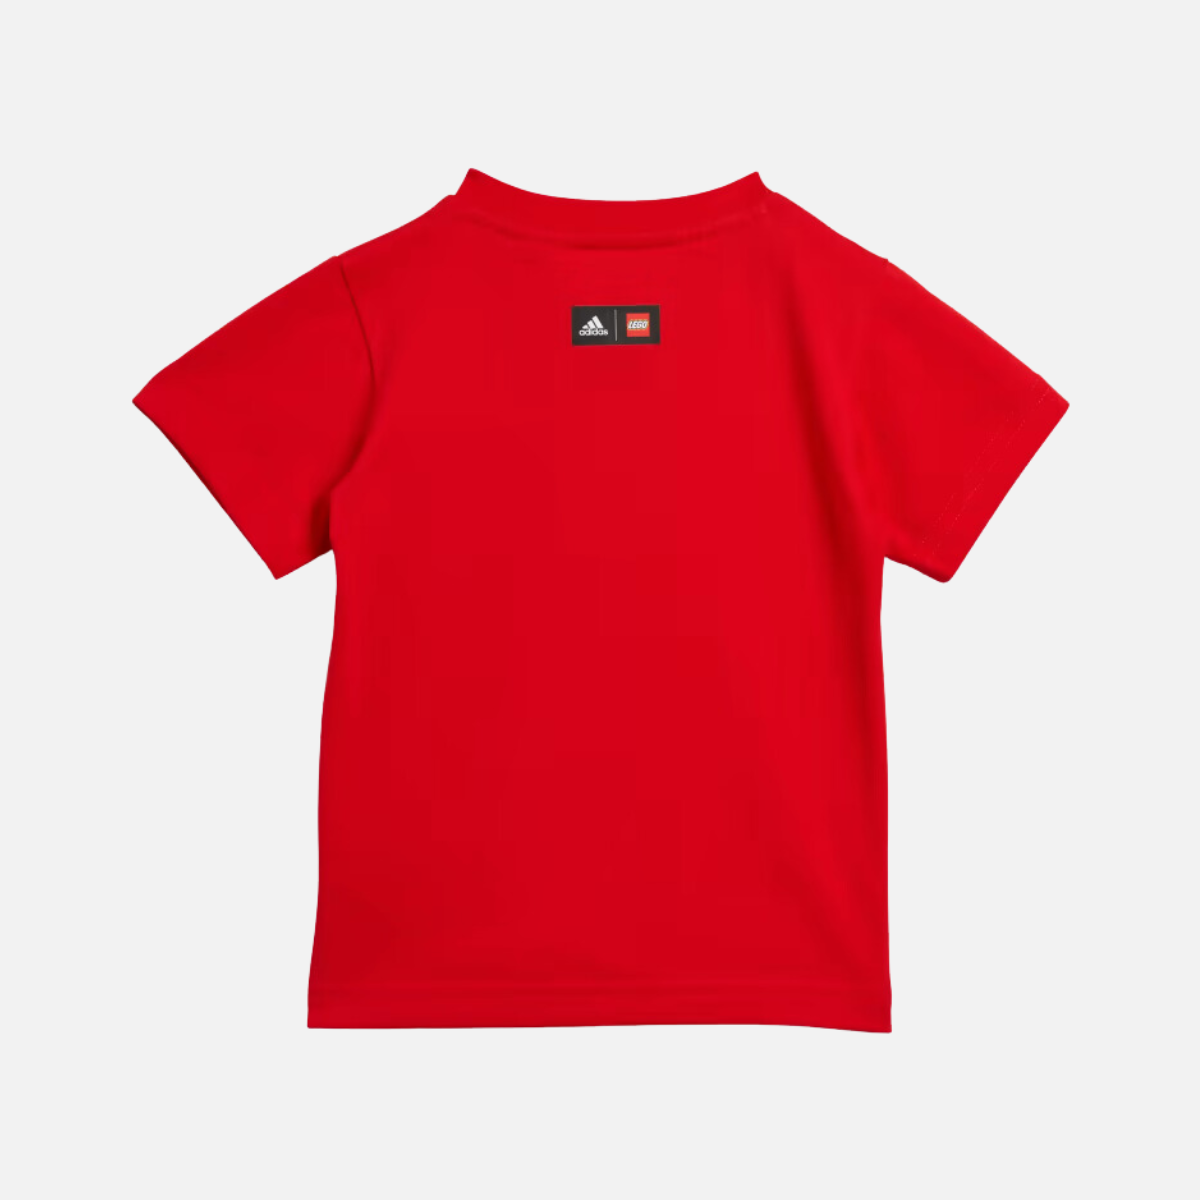 Adidas X Classic Lego Graphic Kids Unisex T-shirt (6-4 Years) -Red